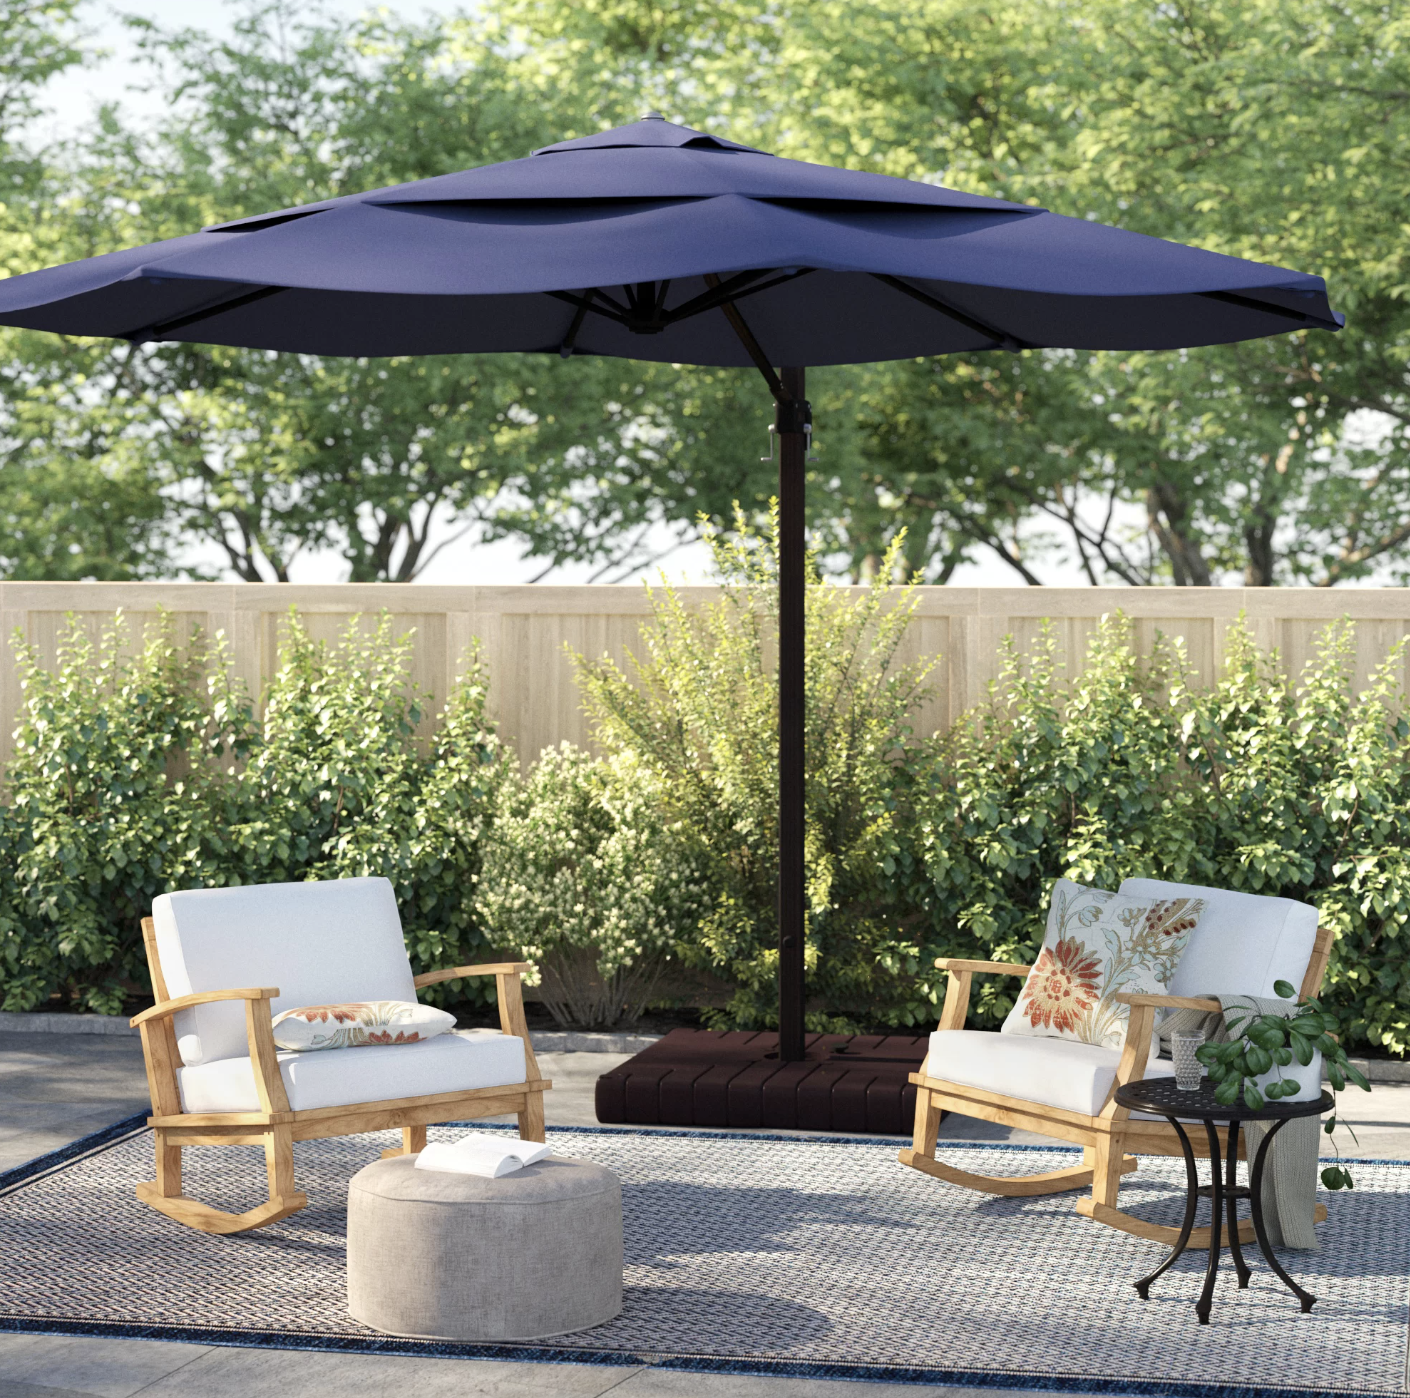 <p><strong>$1149.99</strong></p><p><a href="https://go.redirectingat.com?id=74968X1553576&url=https%3A%2F%2Fwww.wayfair.com%2Foutdoor%2Fpdp%2Farlmont-co-placencia-11-cantilever-umbrella-w003131152.html&sref=https%3A%2F%2Fwww.popularmechanics.com%2Fhome%2Fg35699462%2Fbest-cantilever-umbrellas%2F">Shop Now</a></p><p>We love everything about this umbrella. The quality and lineup of features is exceptional, starting with its high-performance Sunbrella canopy that delivers maximum protection against moisture, fading, and UV rays.</p><p>The umbrella locks into multiple positions and swivels 360 degrees, plus it has an easy-to-operate foot pedal. However, the black aluminum frame needs to be secured with a weighted base, which must be purchased separately.</p>